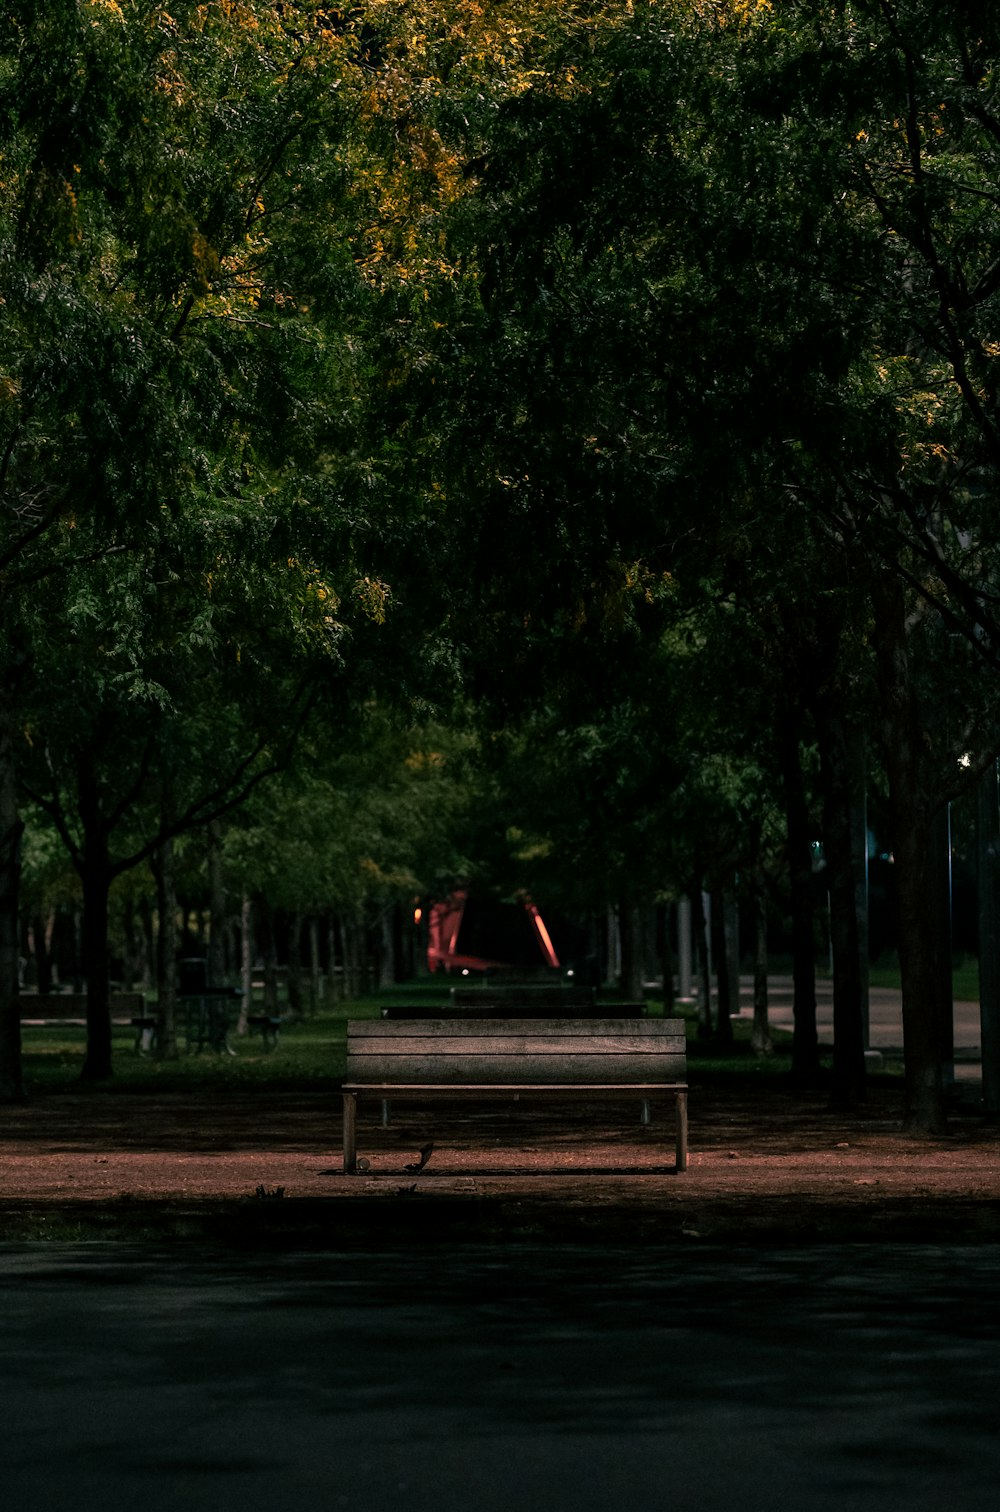 a park bench sitting in the middle of a park